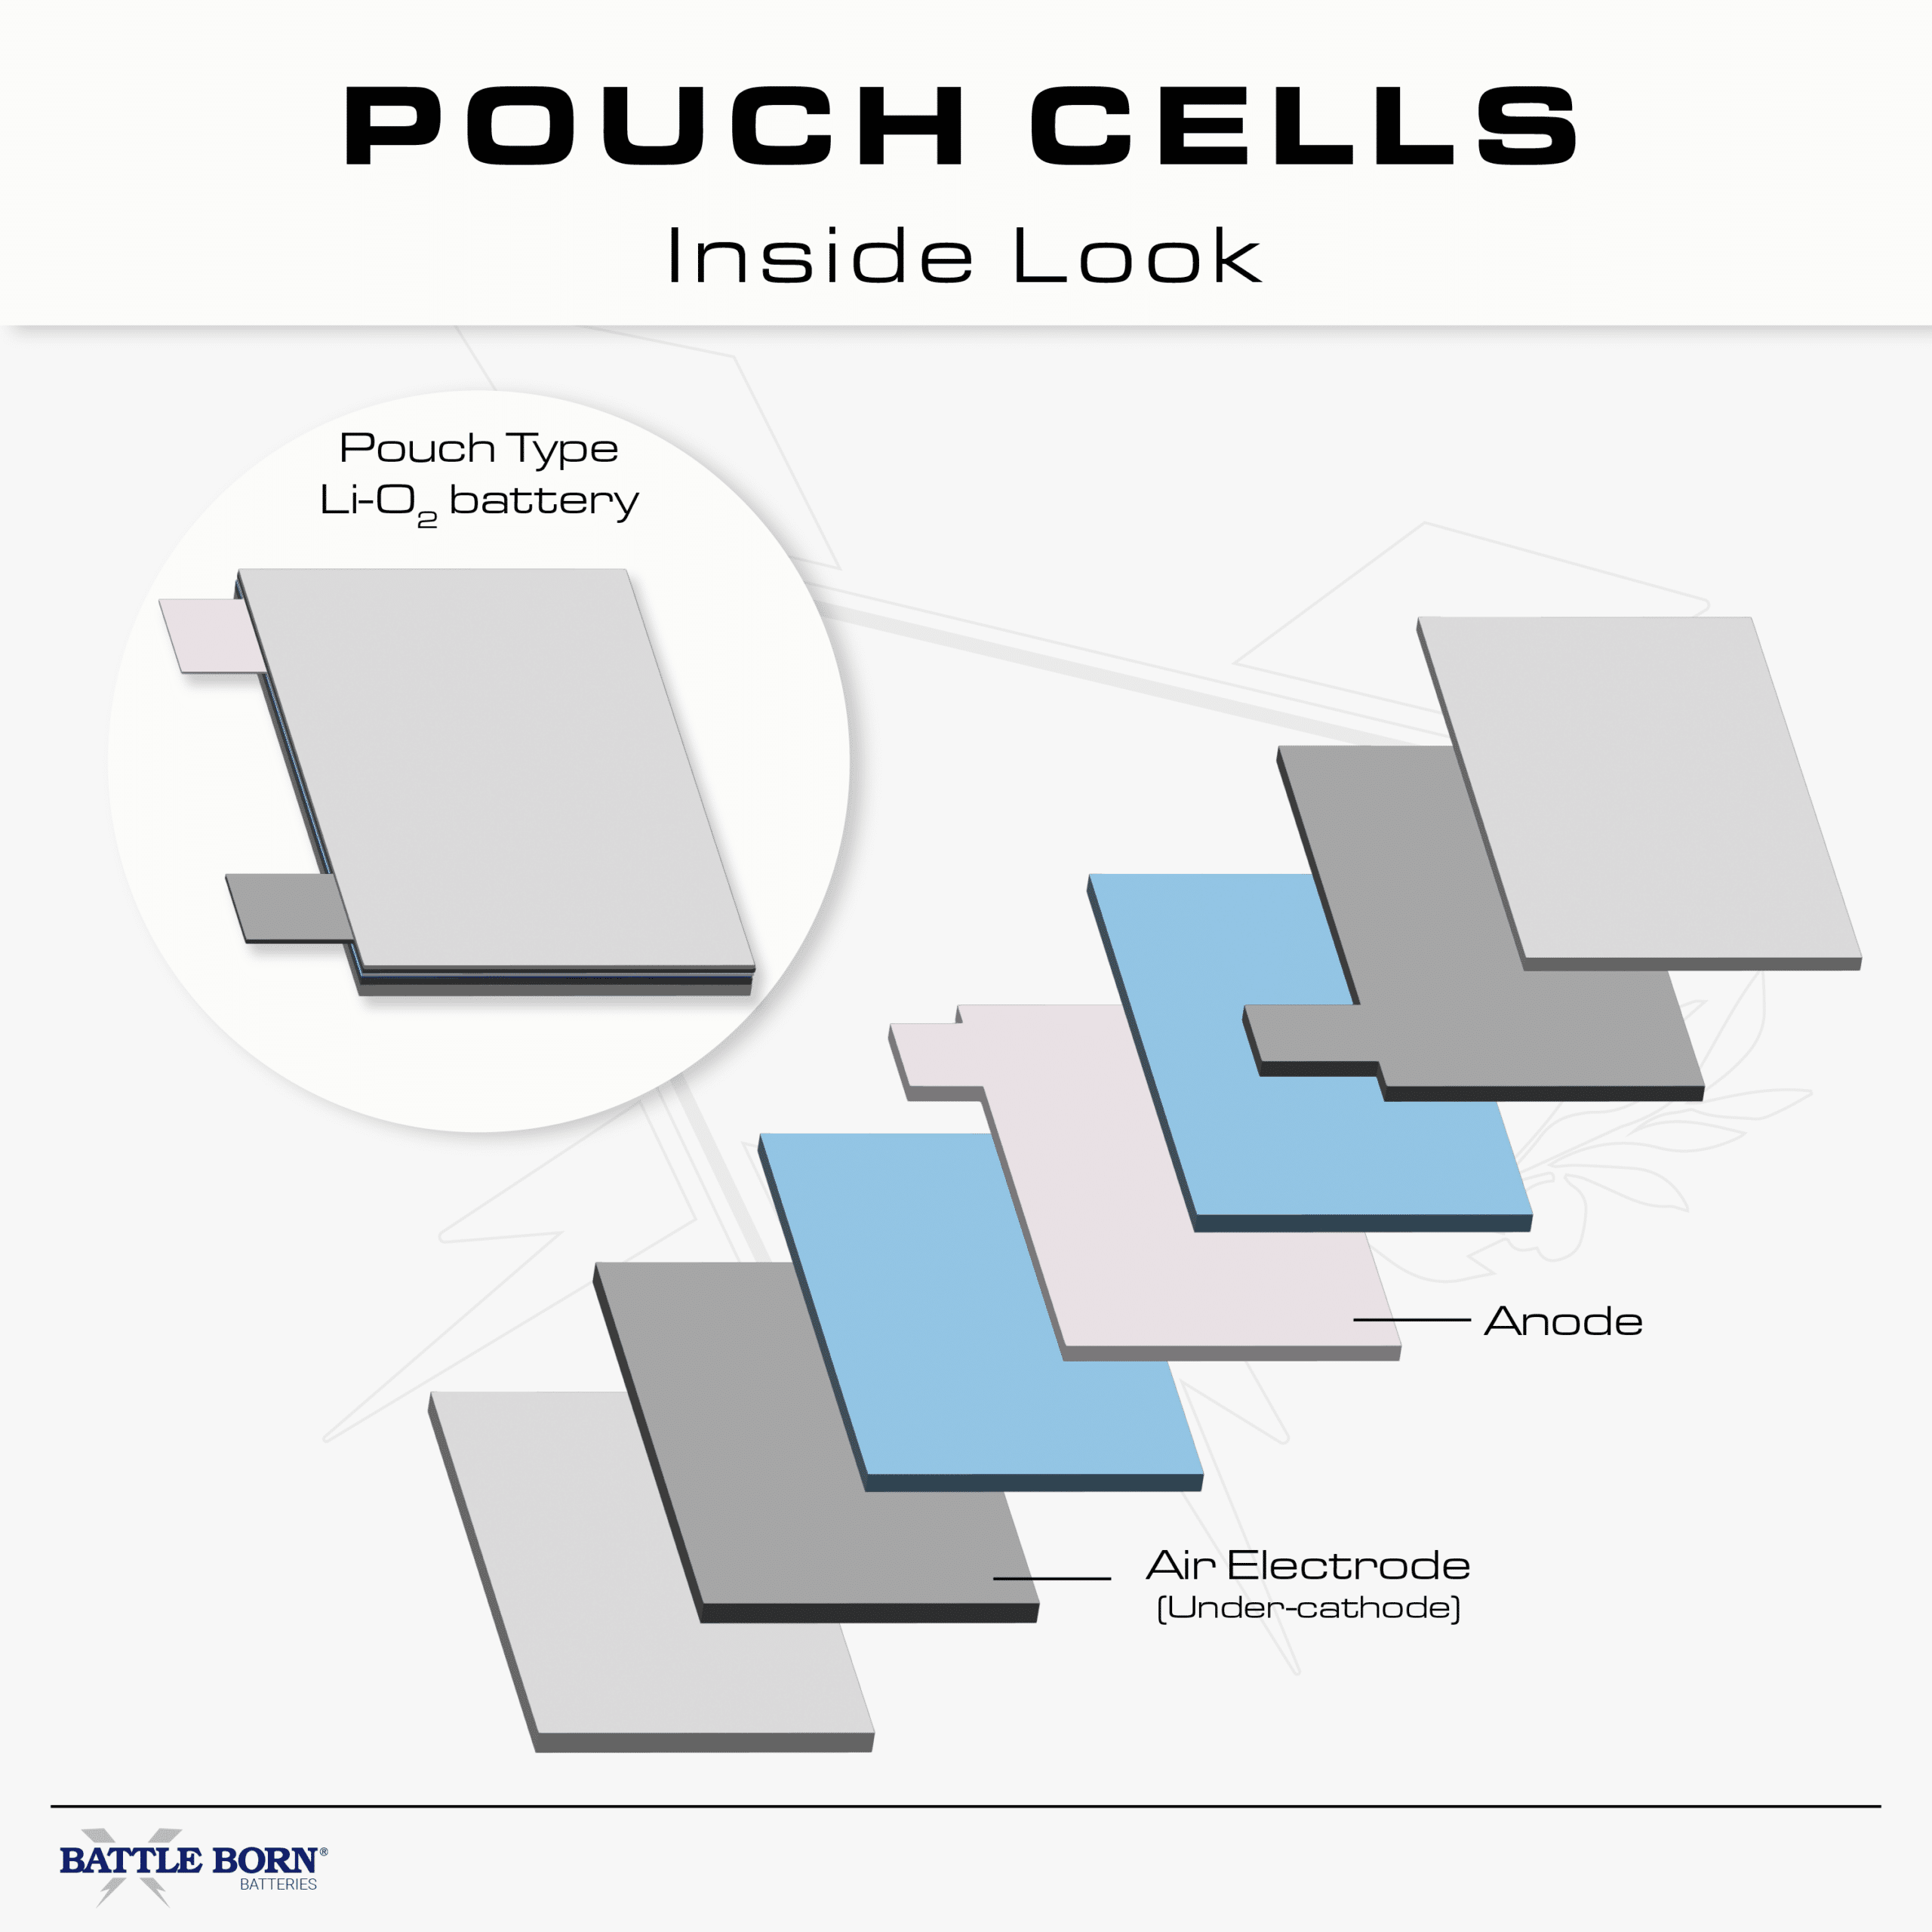 Inside look at pouch cell battery format